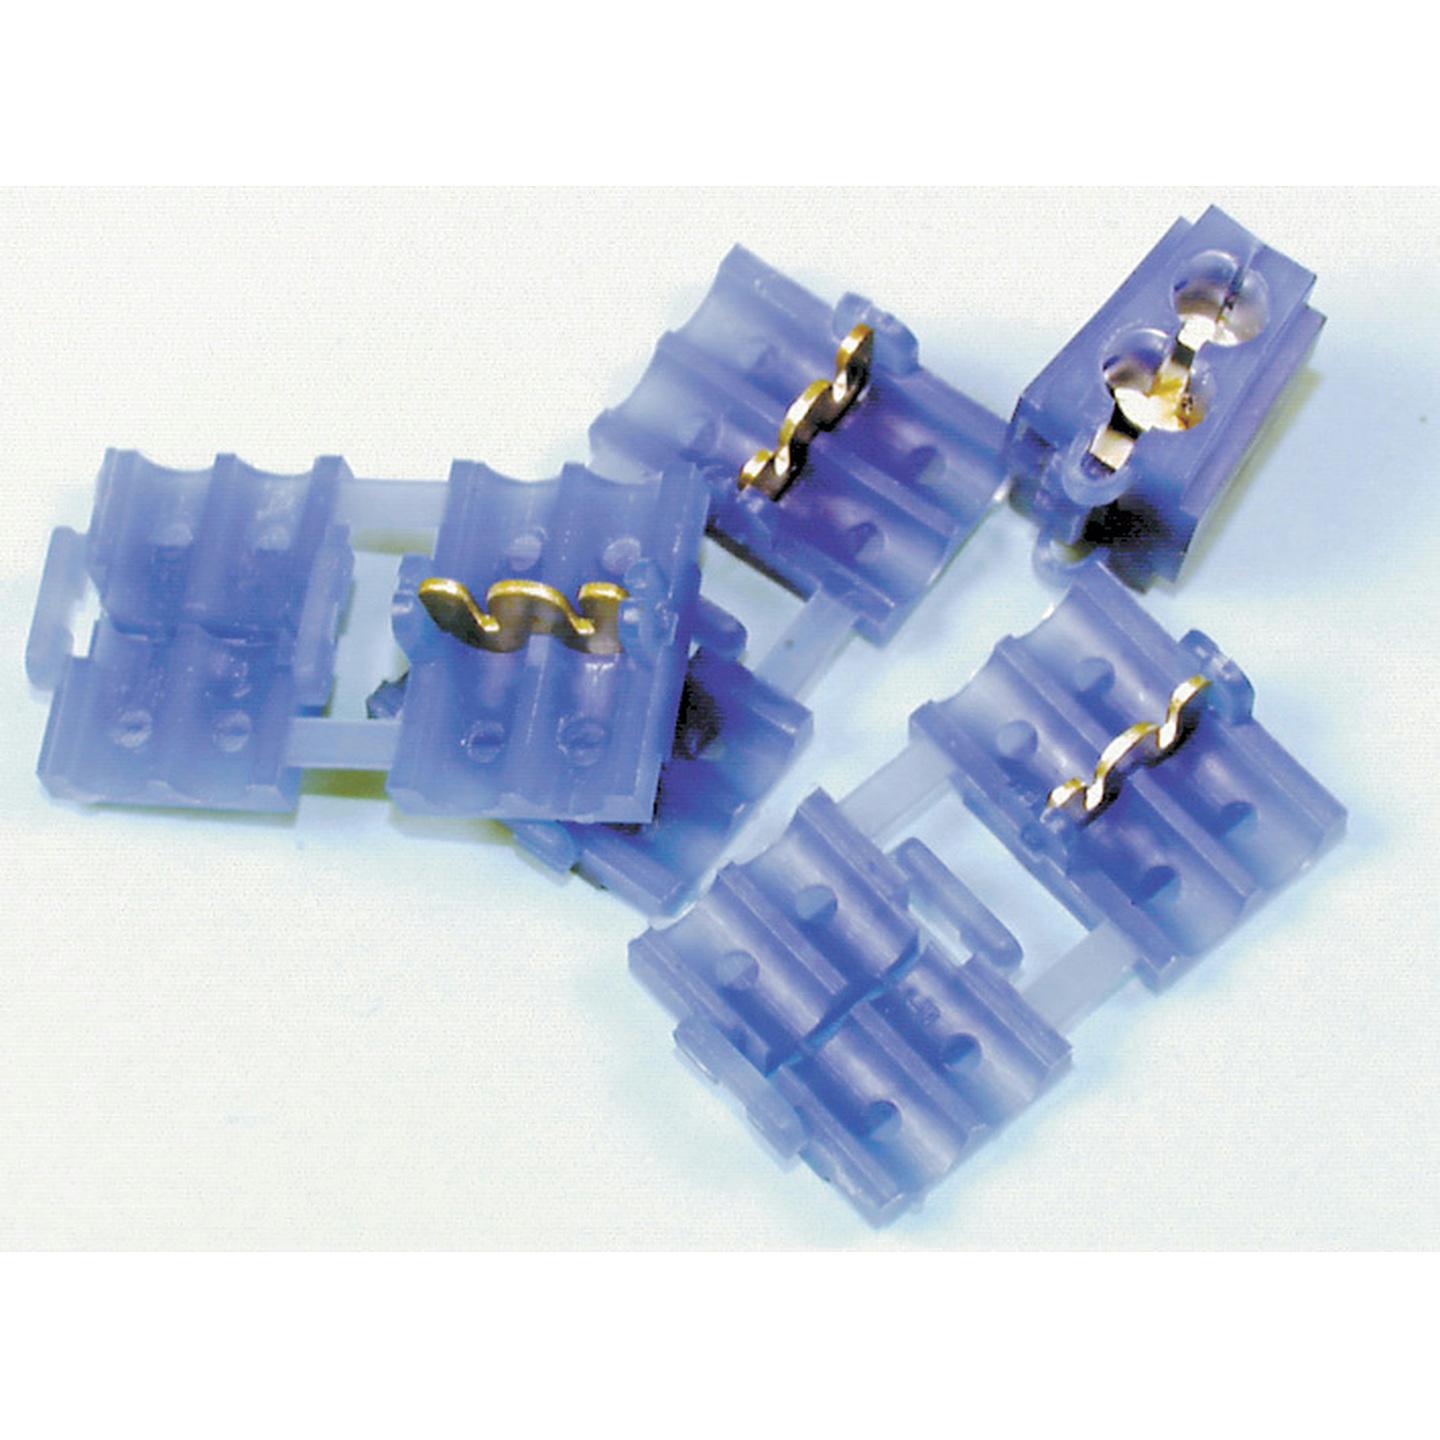 Contact Connectors - Wire Joiners - Pack of 4